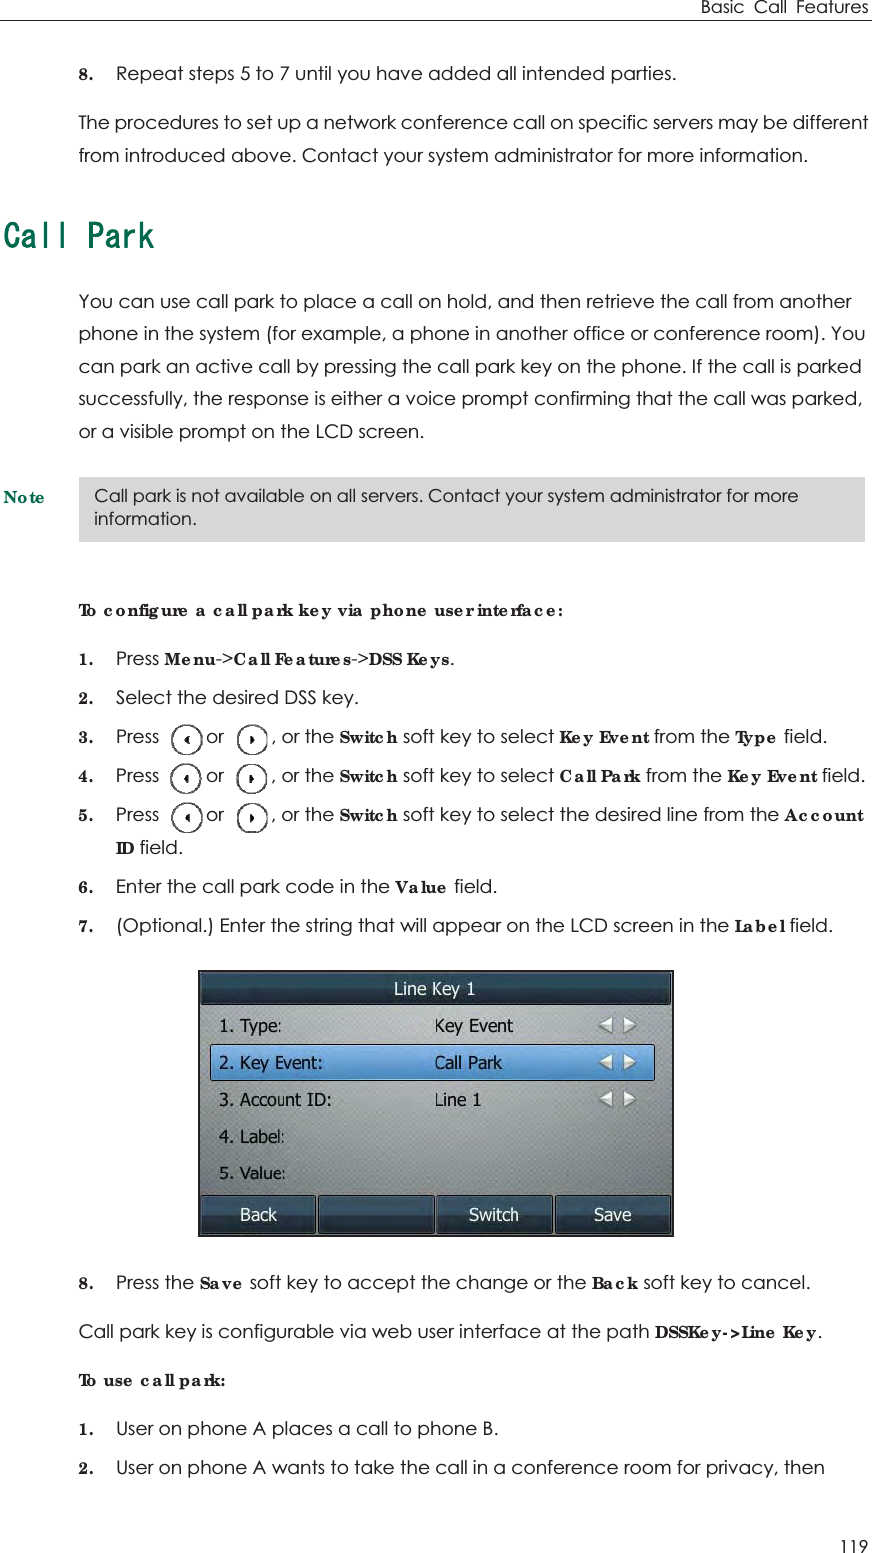 Basic Call Features 119 8. Repeat steps 5 to 7 until you have added all intended parties. The procedures to set up a network conference call on specific servers may be different from introduced above. Contact your system administrator for more information. %CNN2CTMYou can use call park to place a call on hold, and then retrieve the call from another phone in the system (for example, a phone in another office or conference room). You can park an active call by pressing the call park key on the phone. If the call is parked successfully, the response is either a voice prompt confirming that the call was parked, or a visible prompt on the LCD screen. NoteTo configure a call park key via phone user interface: 1. Press Menu-&gt;Call Features-&gt;DSS Keys. 2. Select the desired DSS key. 3. Press     or     , or the Switch soft key to select Key Event from the Type field. 4. Press     or     , or the Switch soft key to select Call Park from the Key Event field. 5. Press     or     , or the Switch soft key to select the desired line from the AccountID field. 6. Enter the call park code in the Value field. 7. (Optional.) Enter the string that will appear on the LCD screen in the Label field.  8. Press the Save soft key to accept the change or the Back soft key to cancel. Call park key is configurable via web user interface at the path DSSKey-&gt;Line Key. To use call park: 1. User on phone A places a call to phone B. 2. User on phone A wants to take the call in a conference room for privacy, then Call park is not available on all servers. Contact your system administrator for more information. 